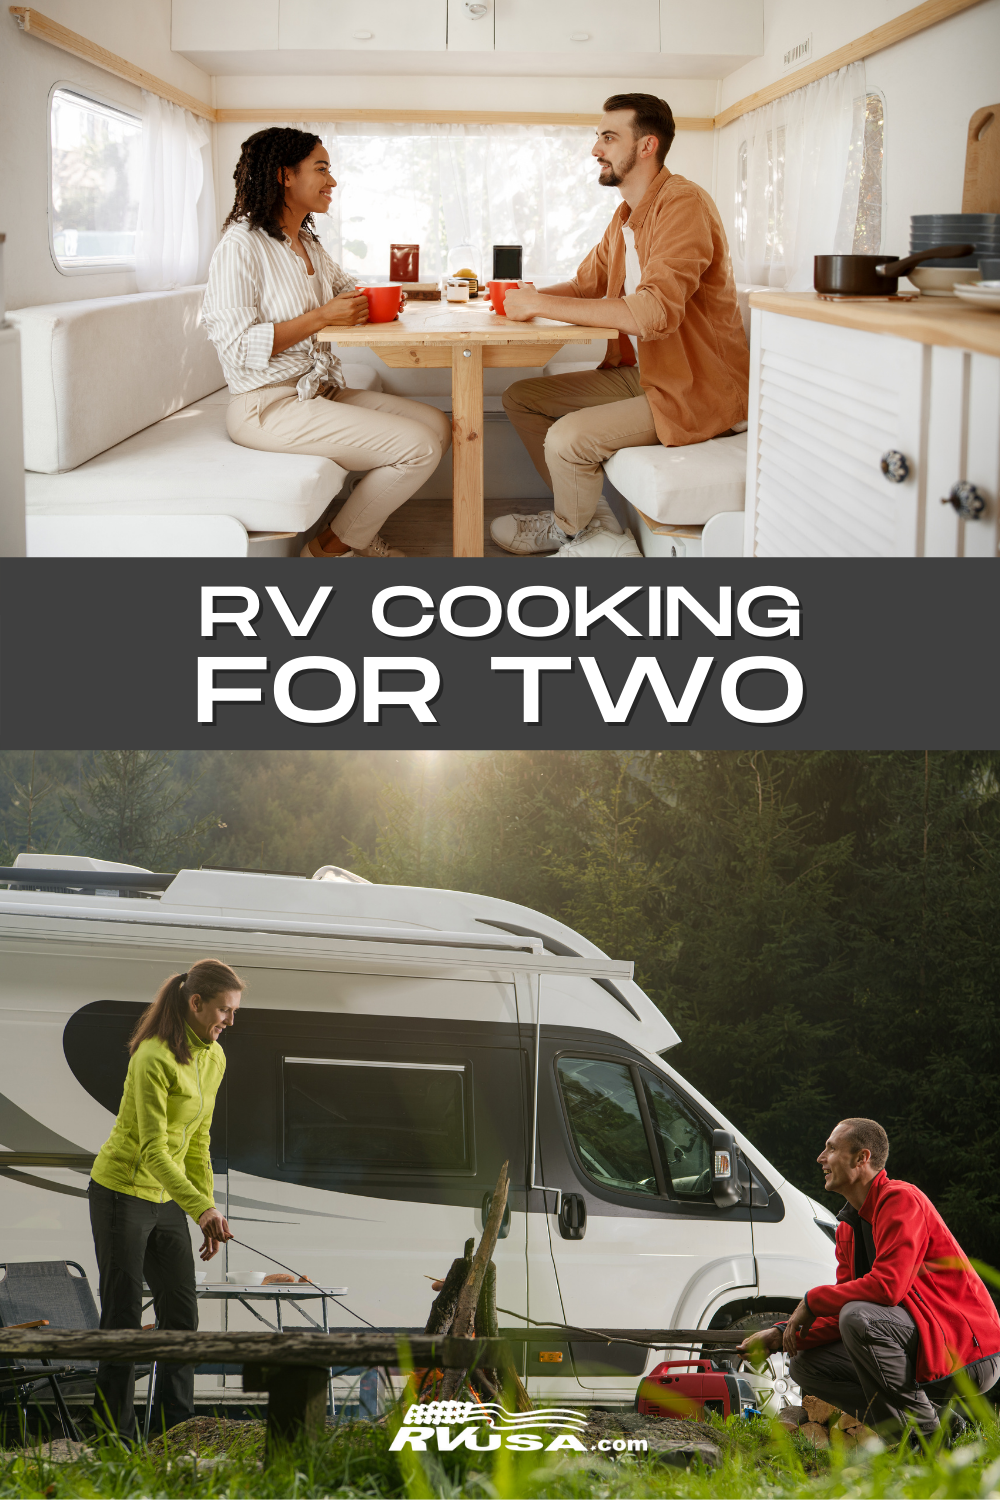 One couple sits inside their RV while another couple cooks over the campfire outside. Text reads "RV Cooking for Two"